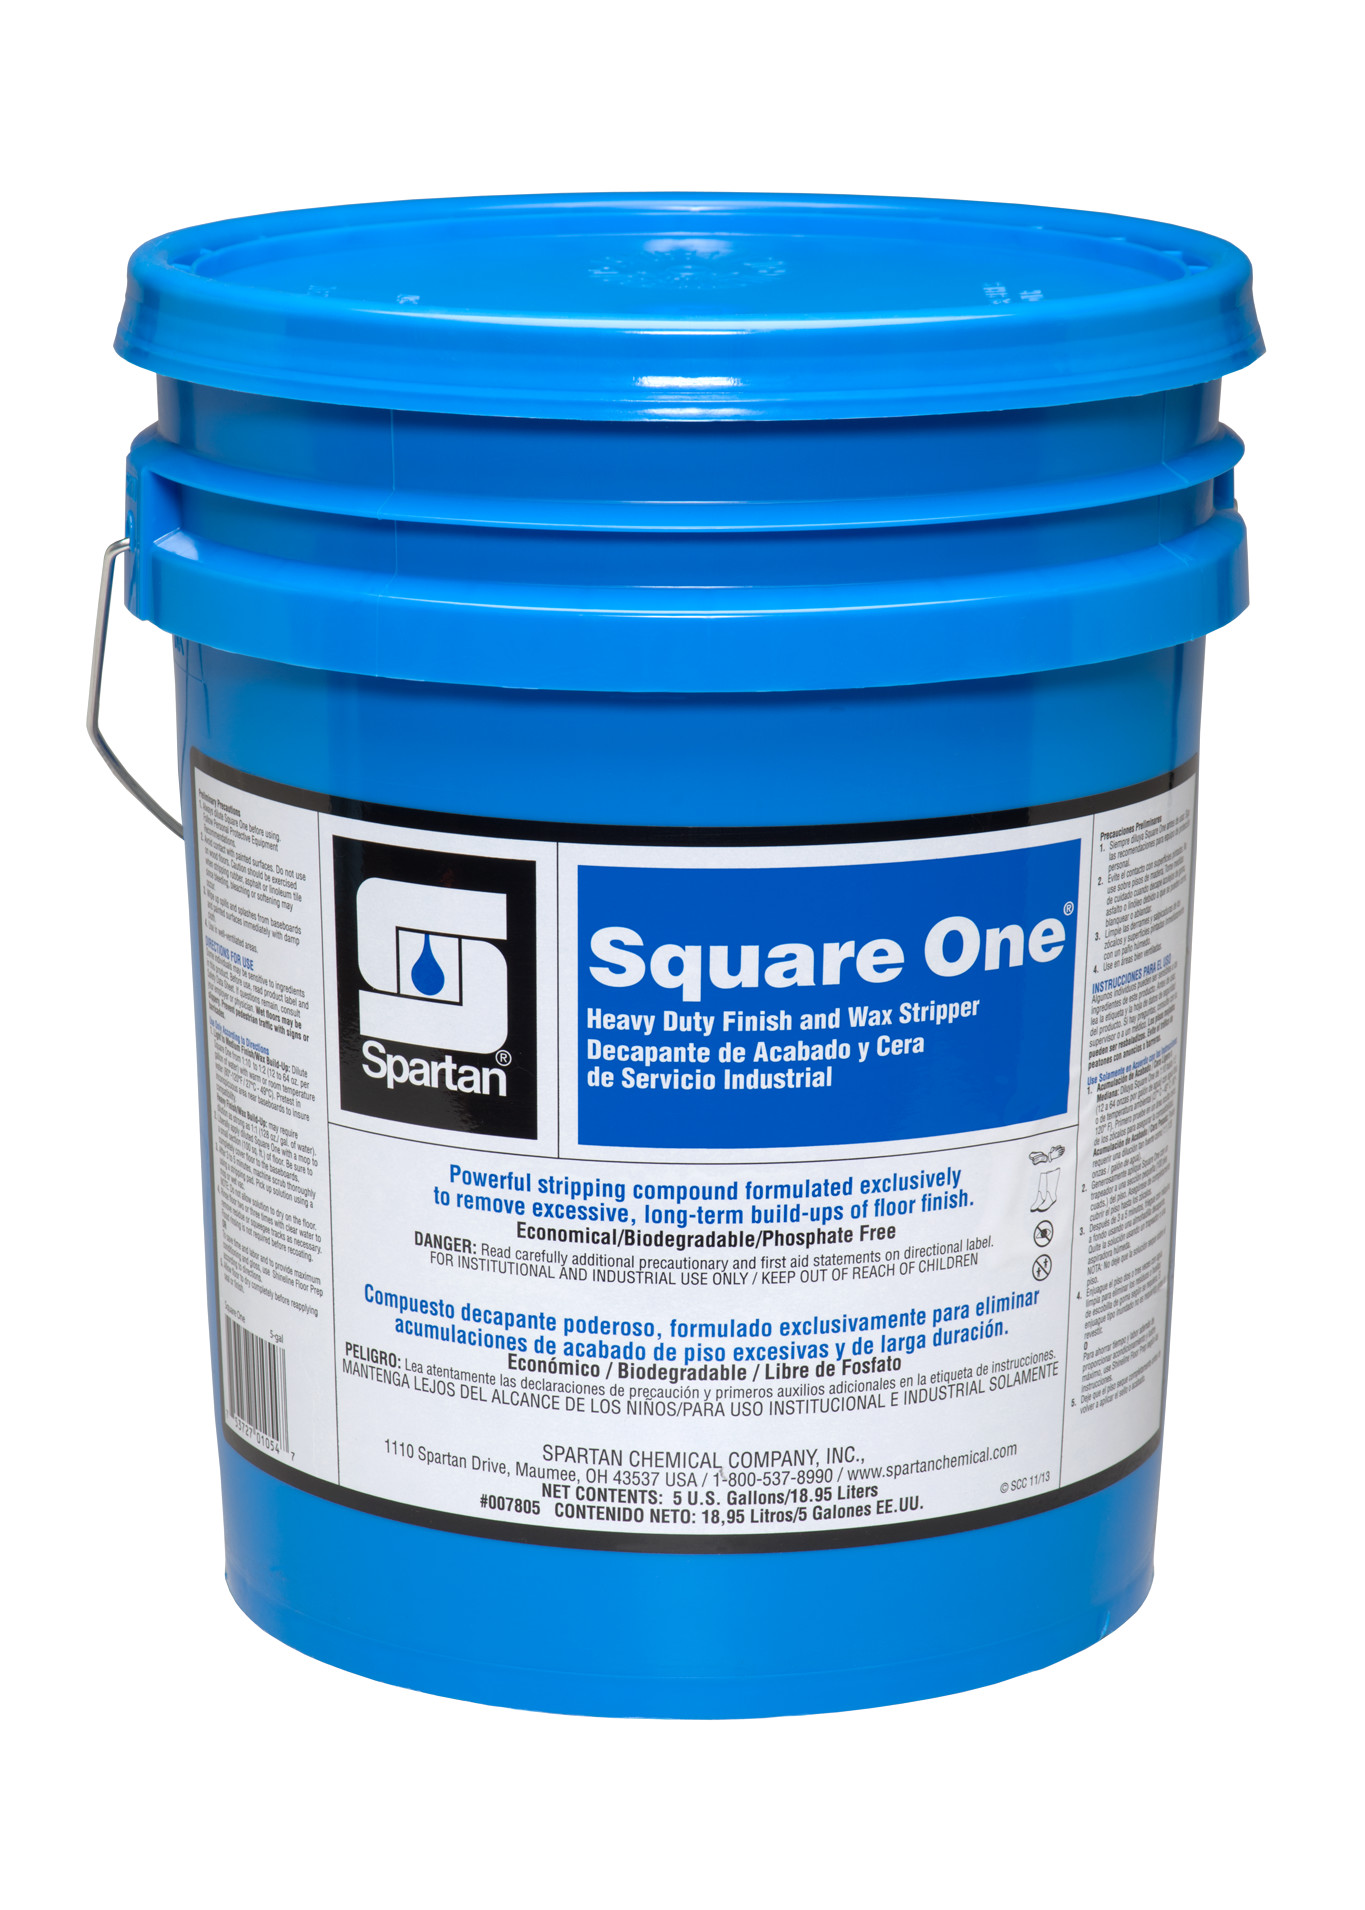 Spartan Chemical Company Square One, 5 GAL PAIL